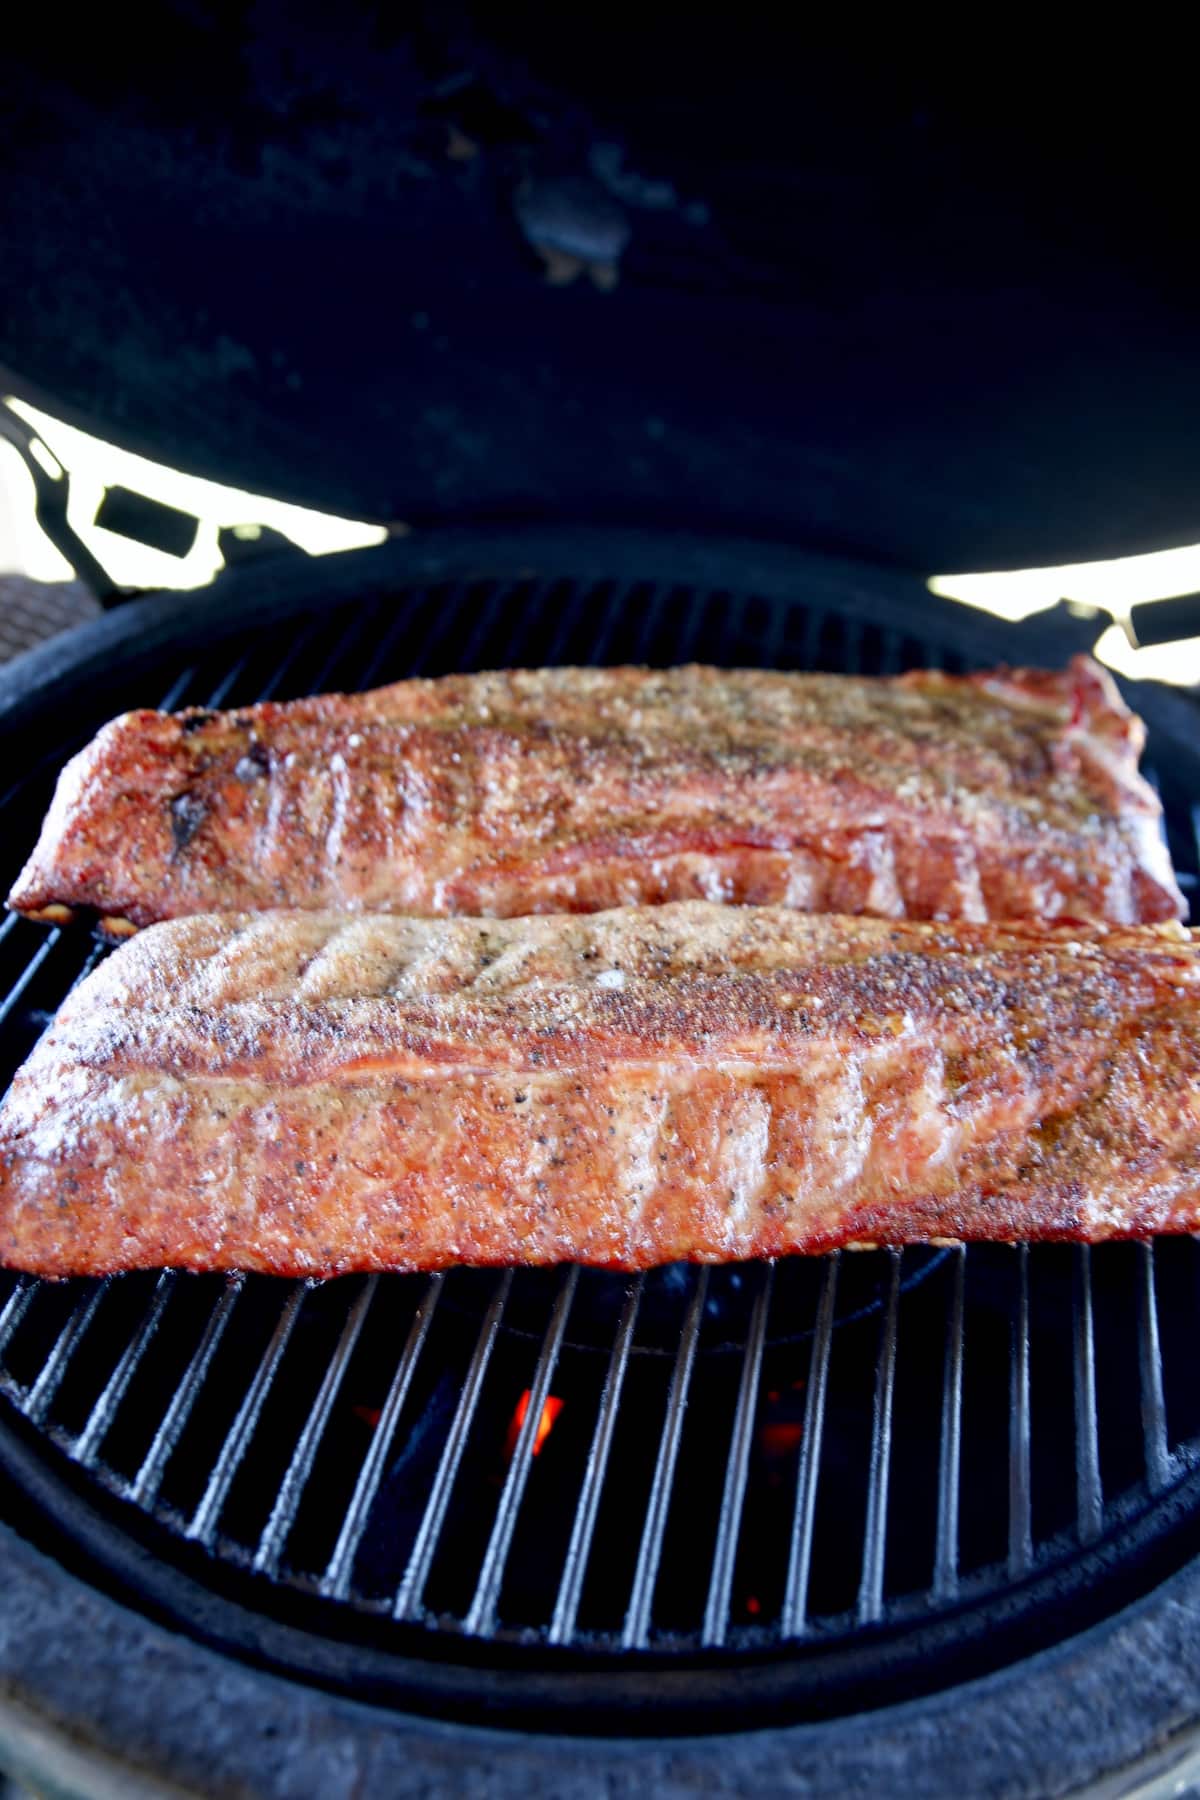 Smoked ribs on a Big Green Egg Grill.